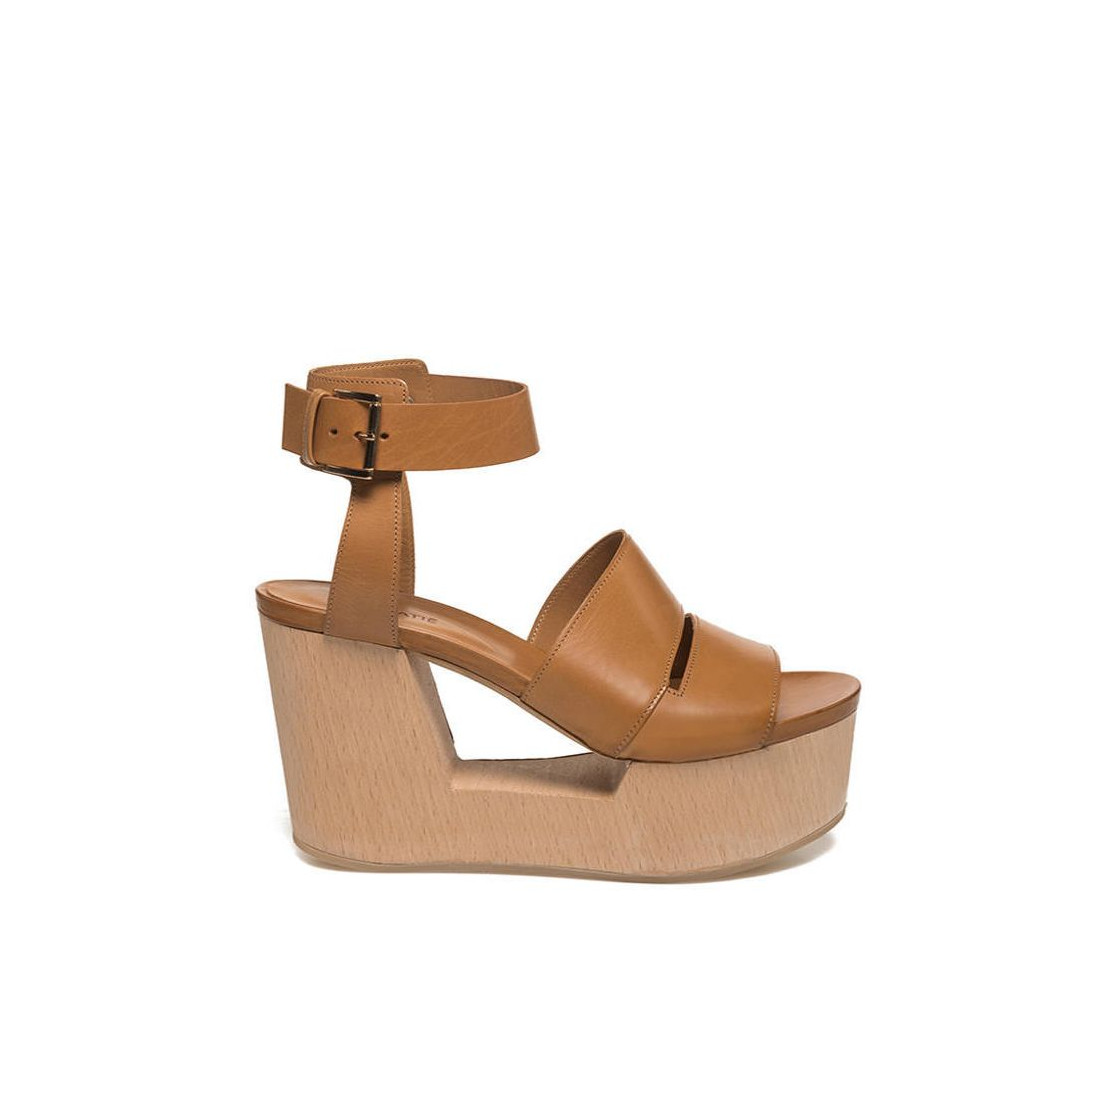 Vic Matie tan leather sandal with wooden wedge